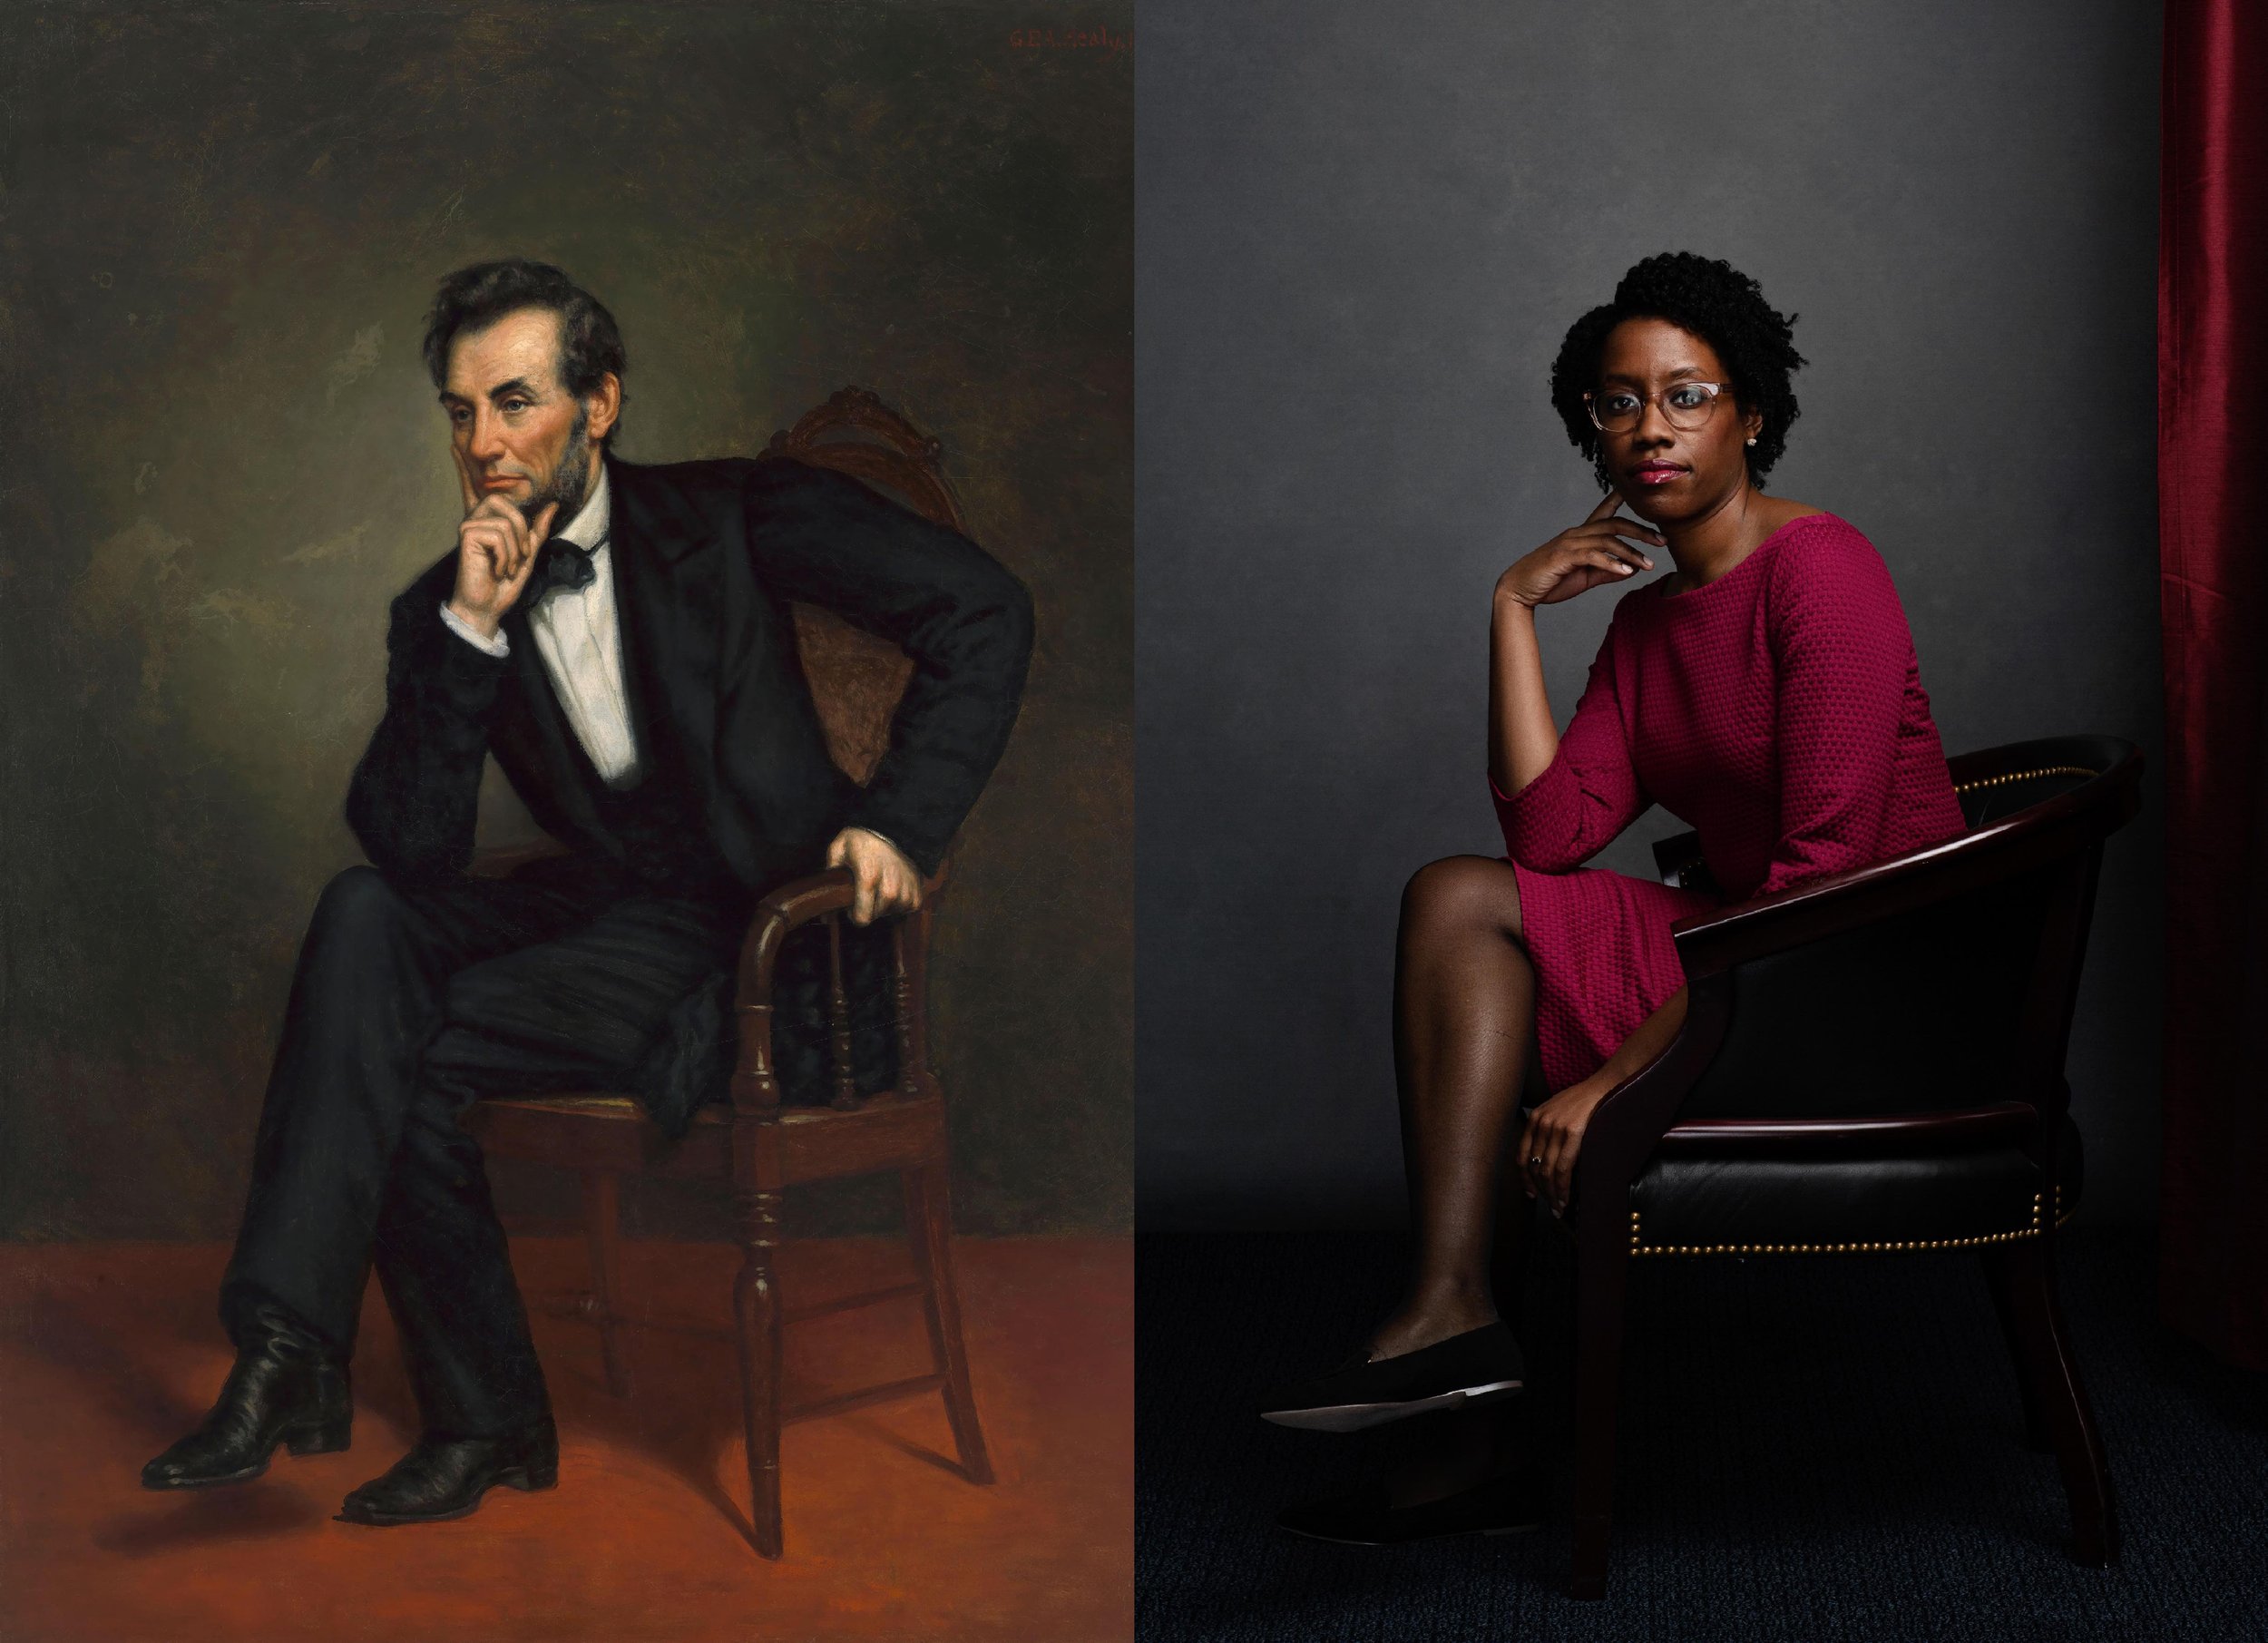  Abraham Lincoln, the 16th president of the United States, painted by George Healy; Lauren Underwood (D-IL), elected in 2018, is the youngest black woman to ever serve in Congress, and the first black woman to represent the 14th congressional distric